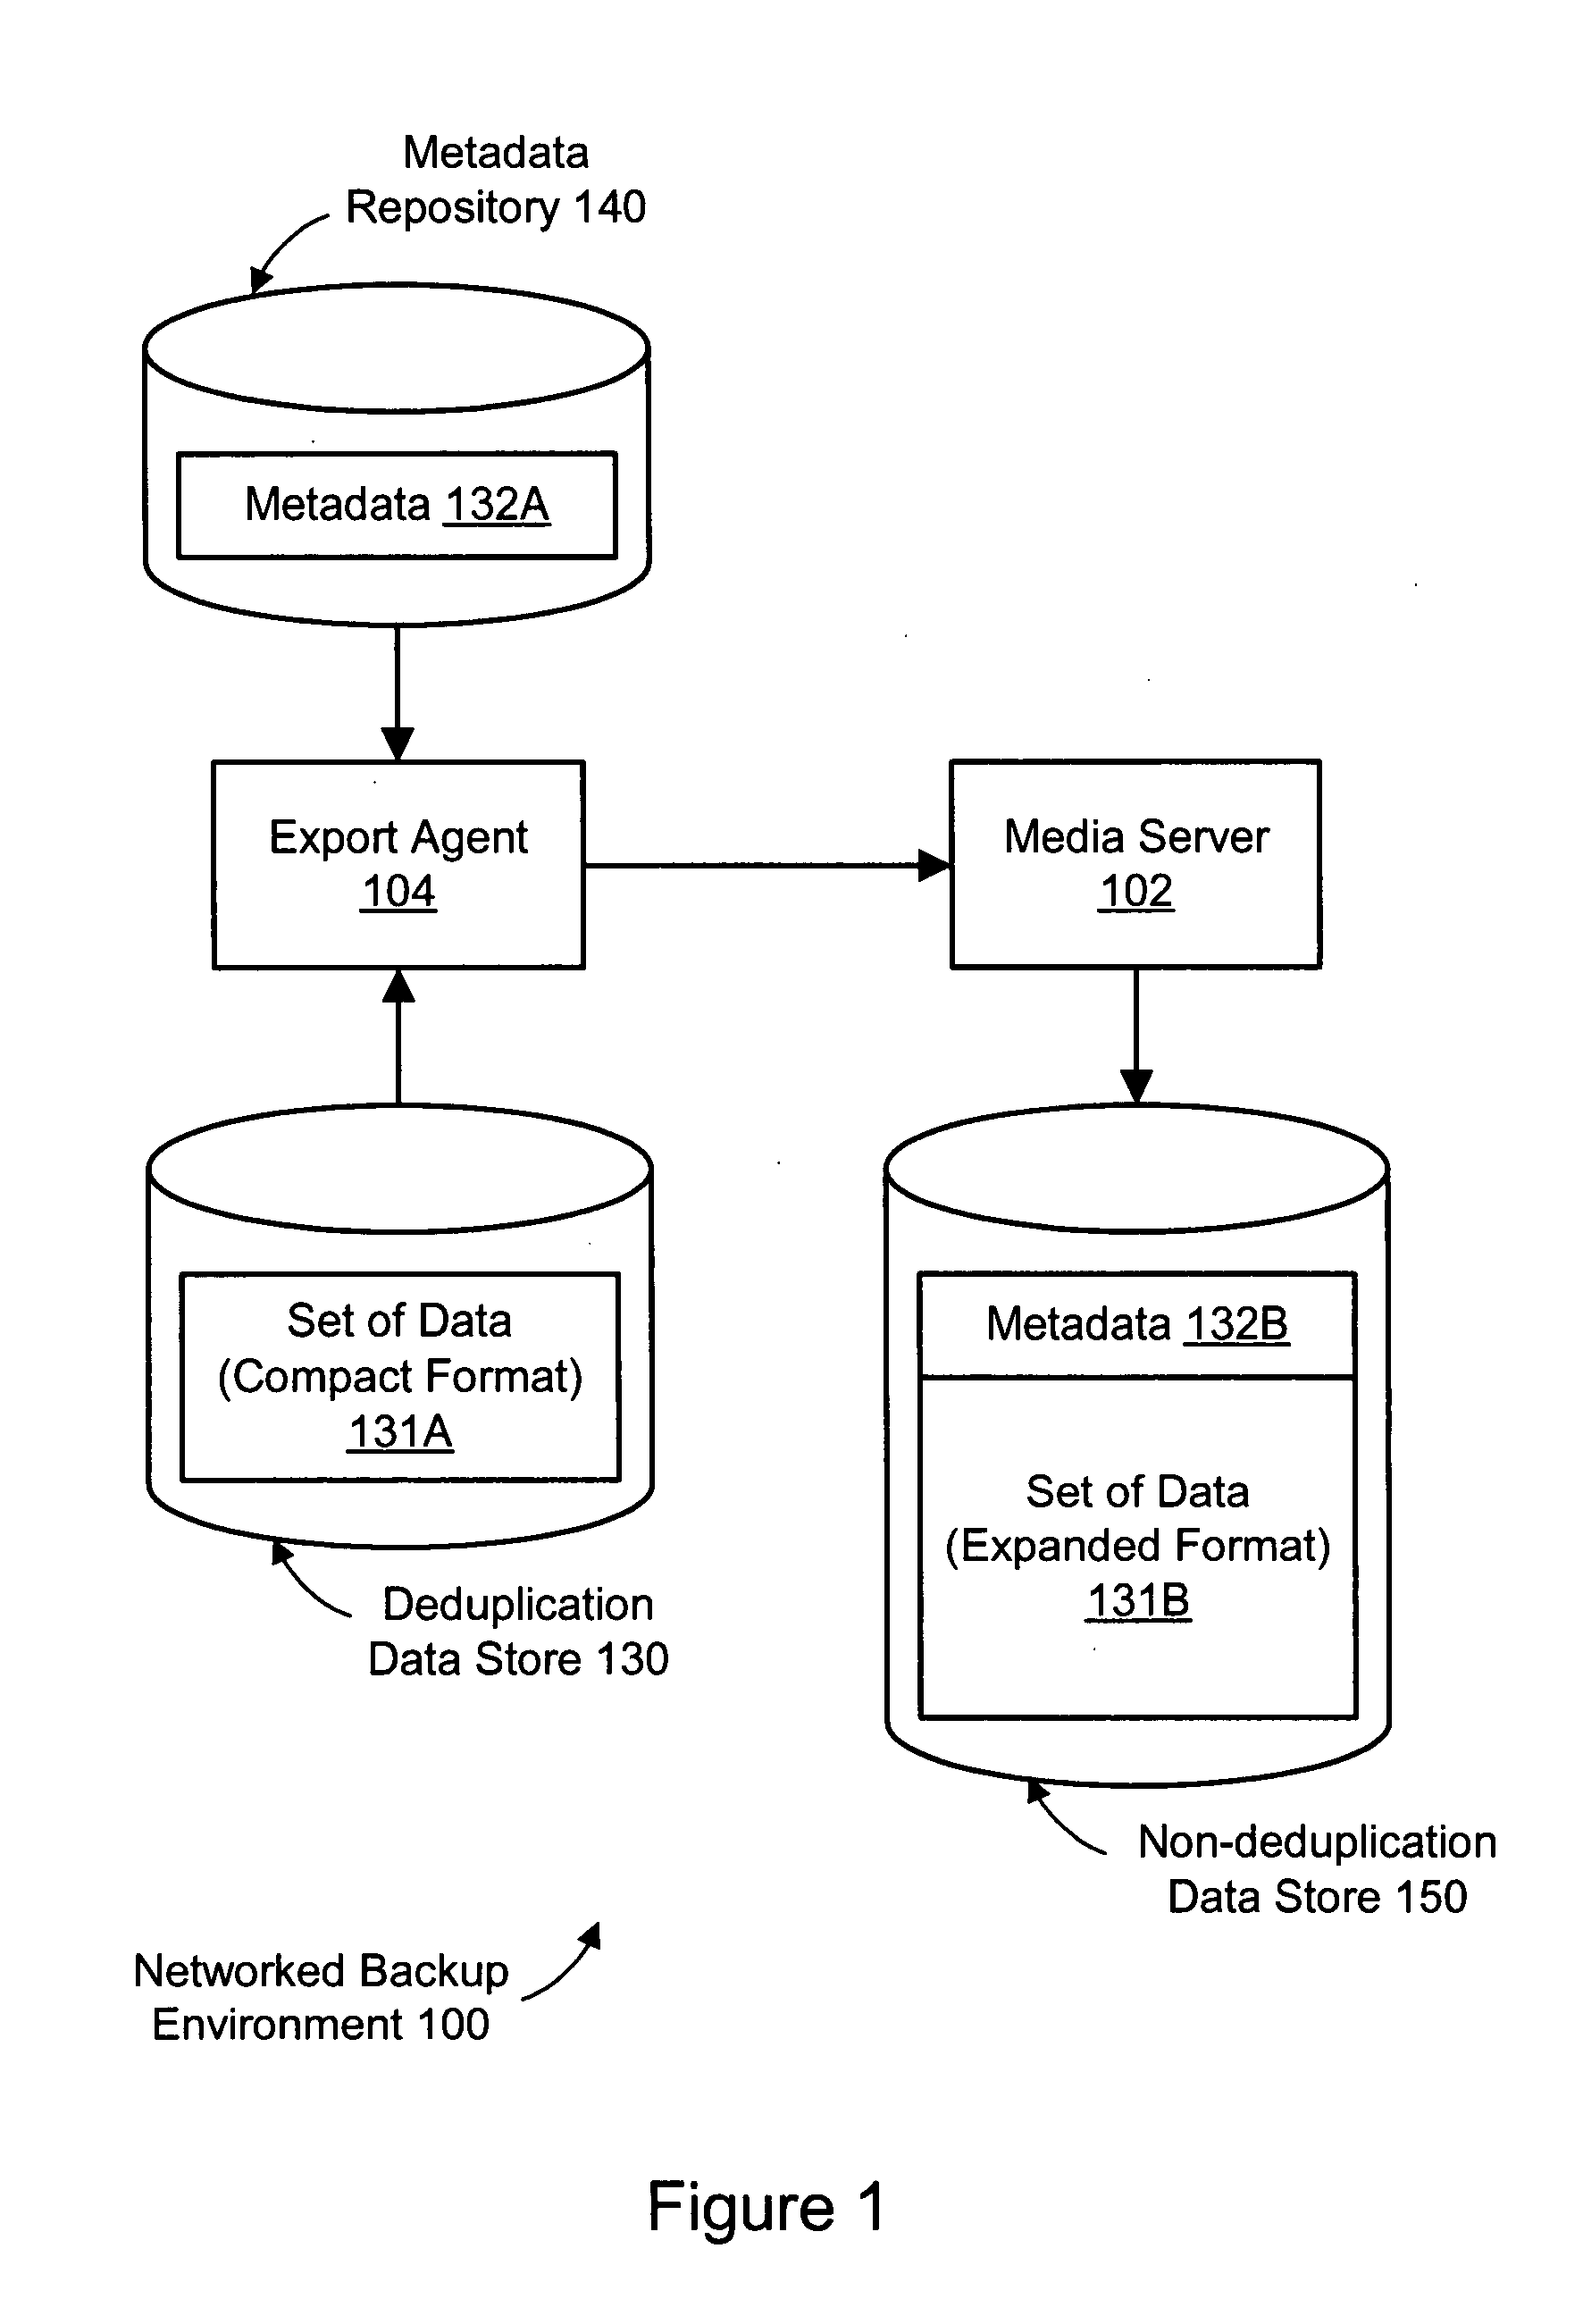 System and method for exporting data directly from deduplication storage to non-deduplication storage